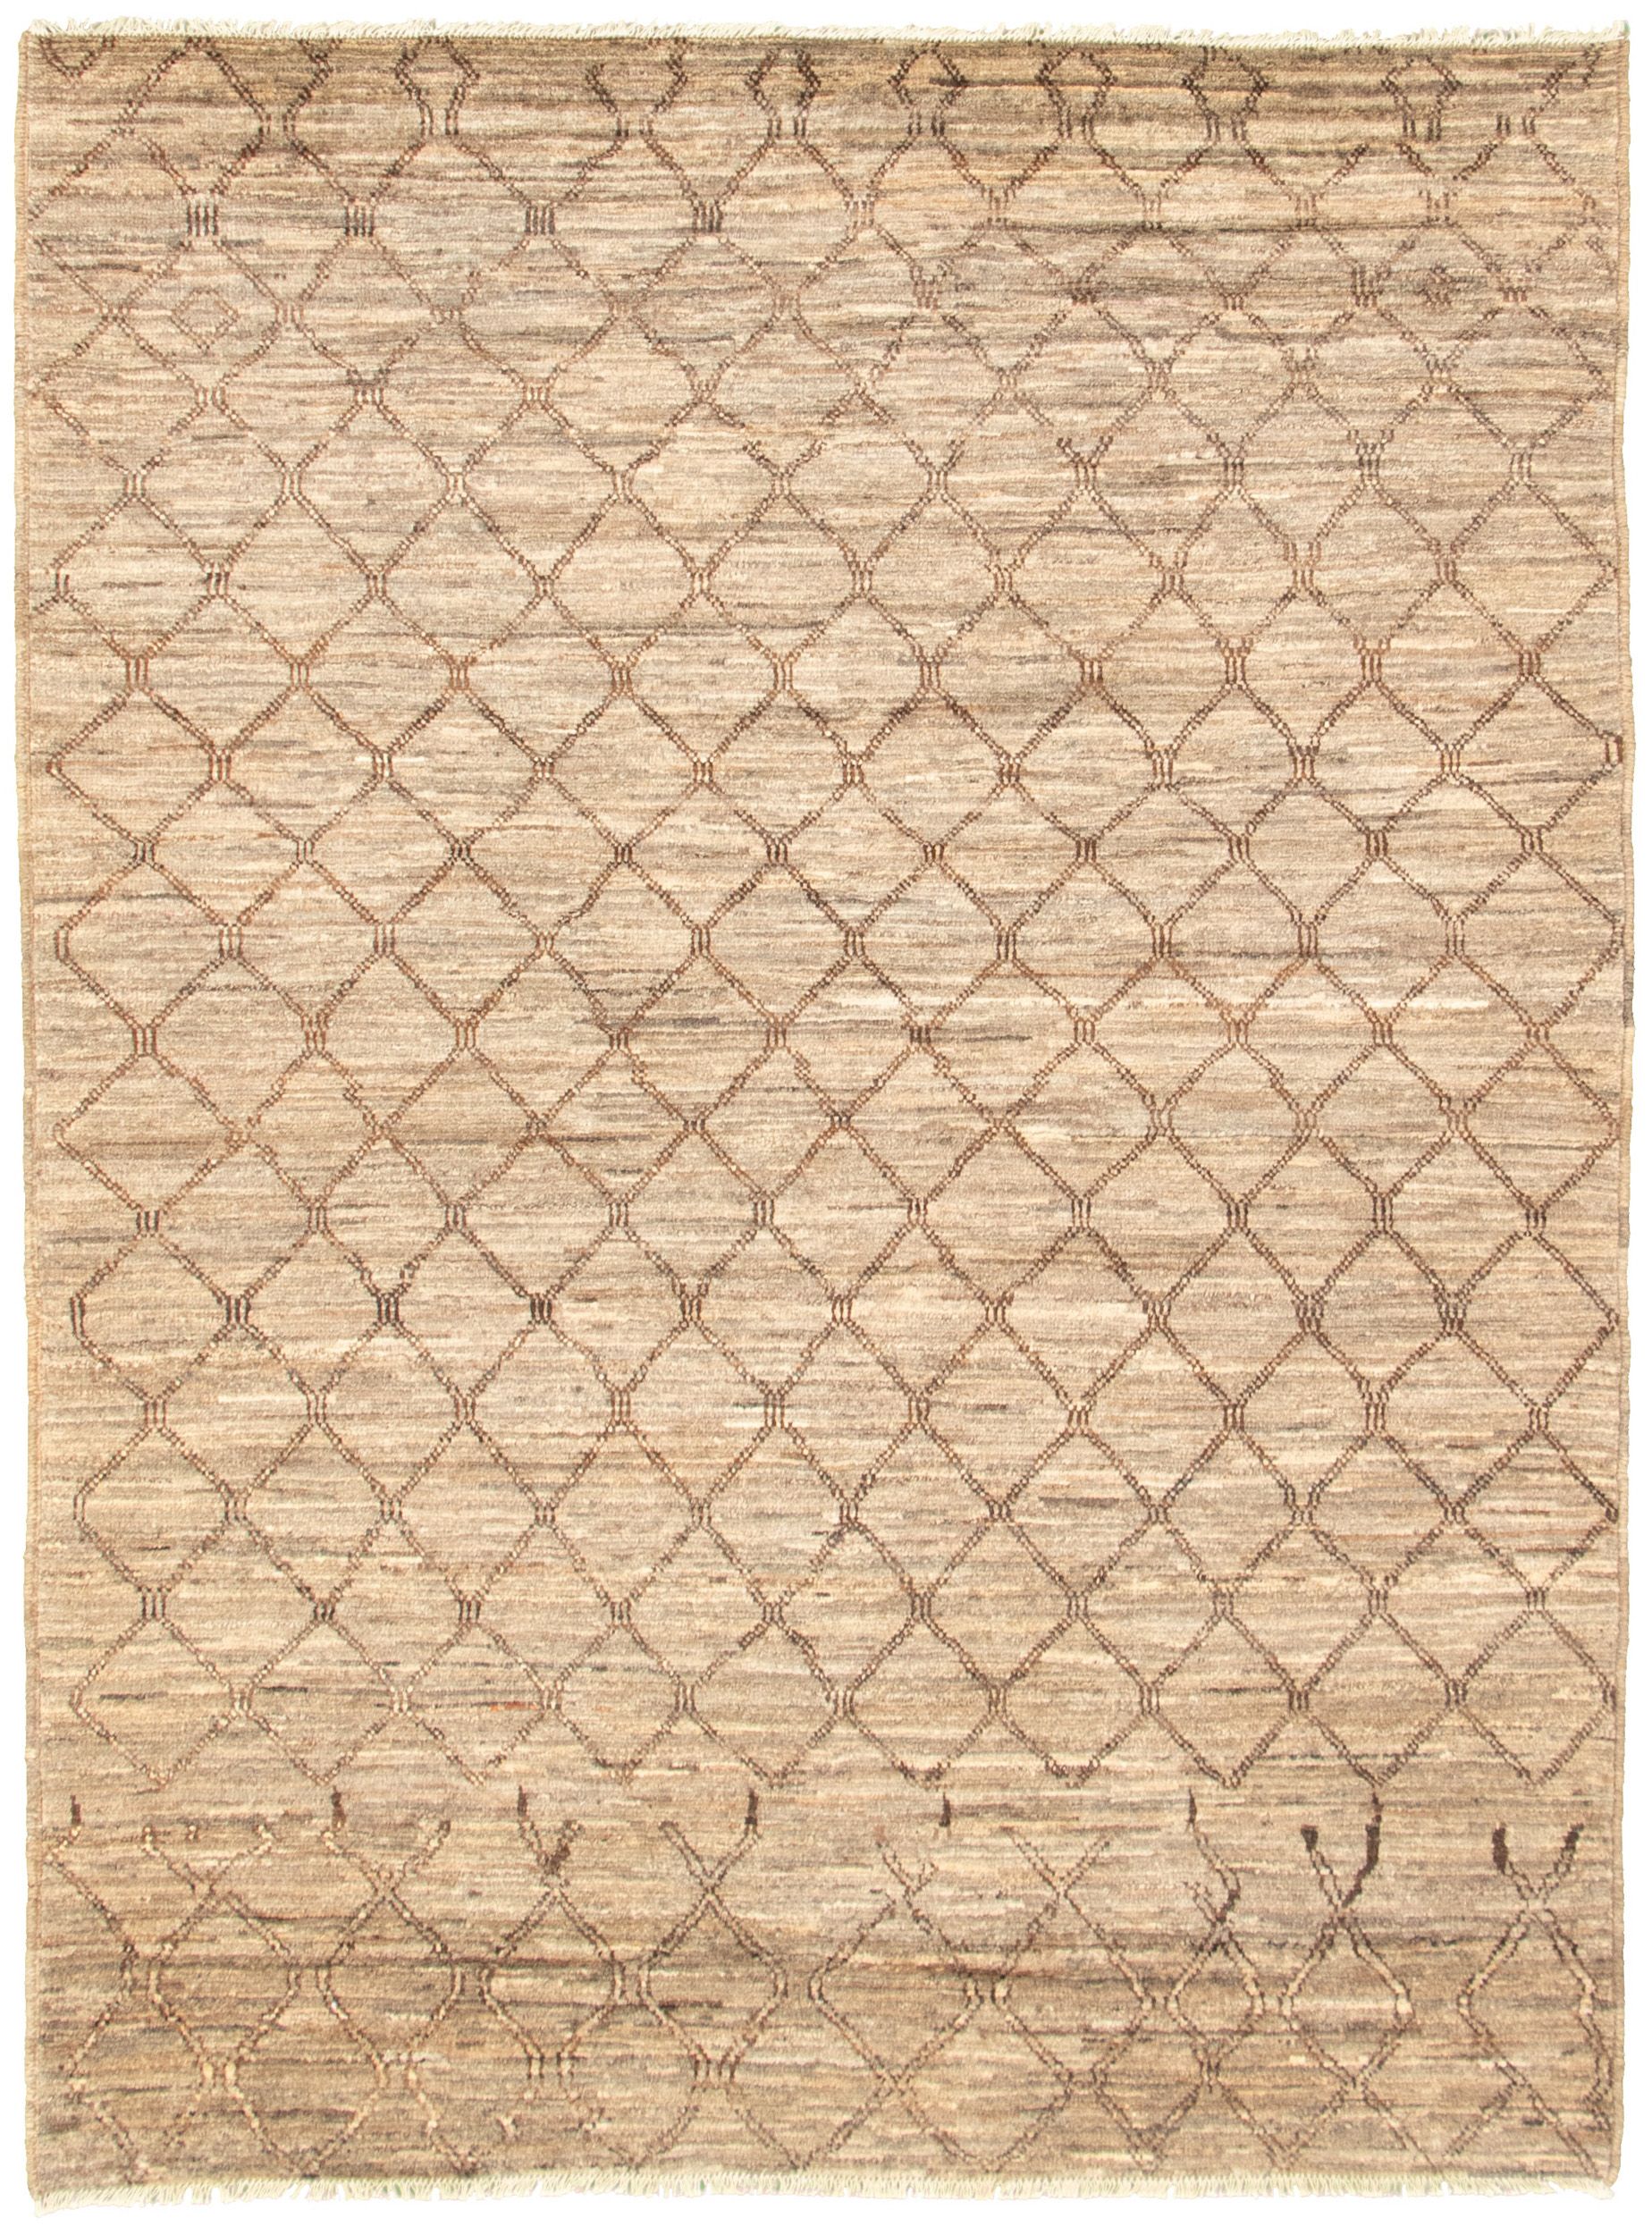 Hand-knotted Marrakech Grey, Khaki Wool Rug 6'3" x 8'5" Size: 6'3" x 8'5"  